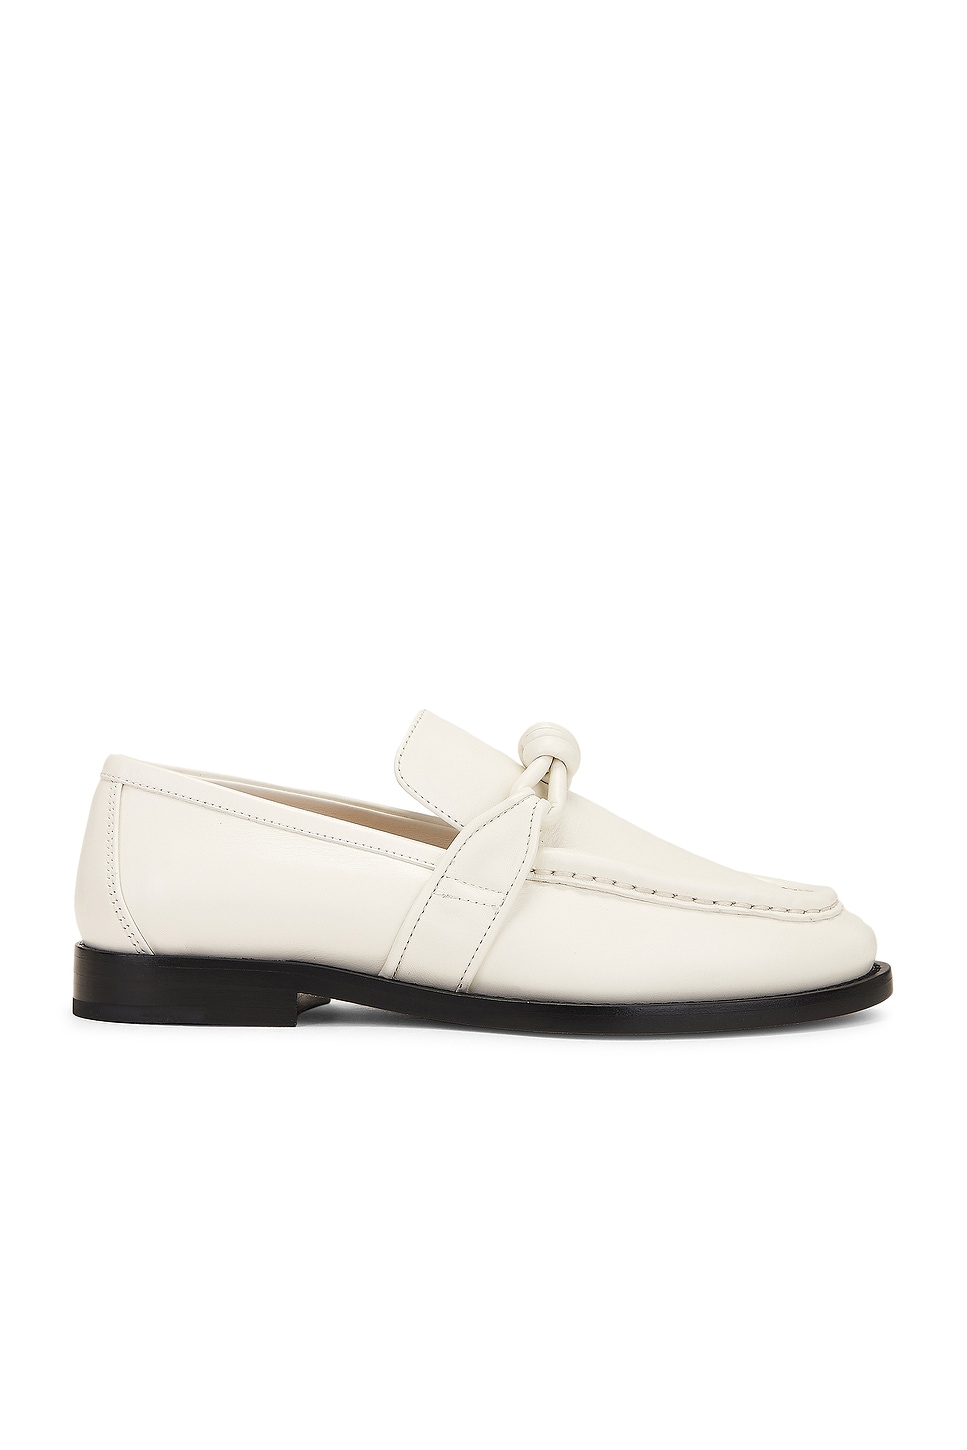 Astaire Flat Loafer in Cream